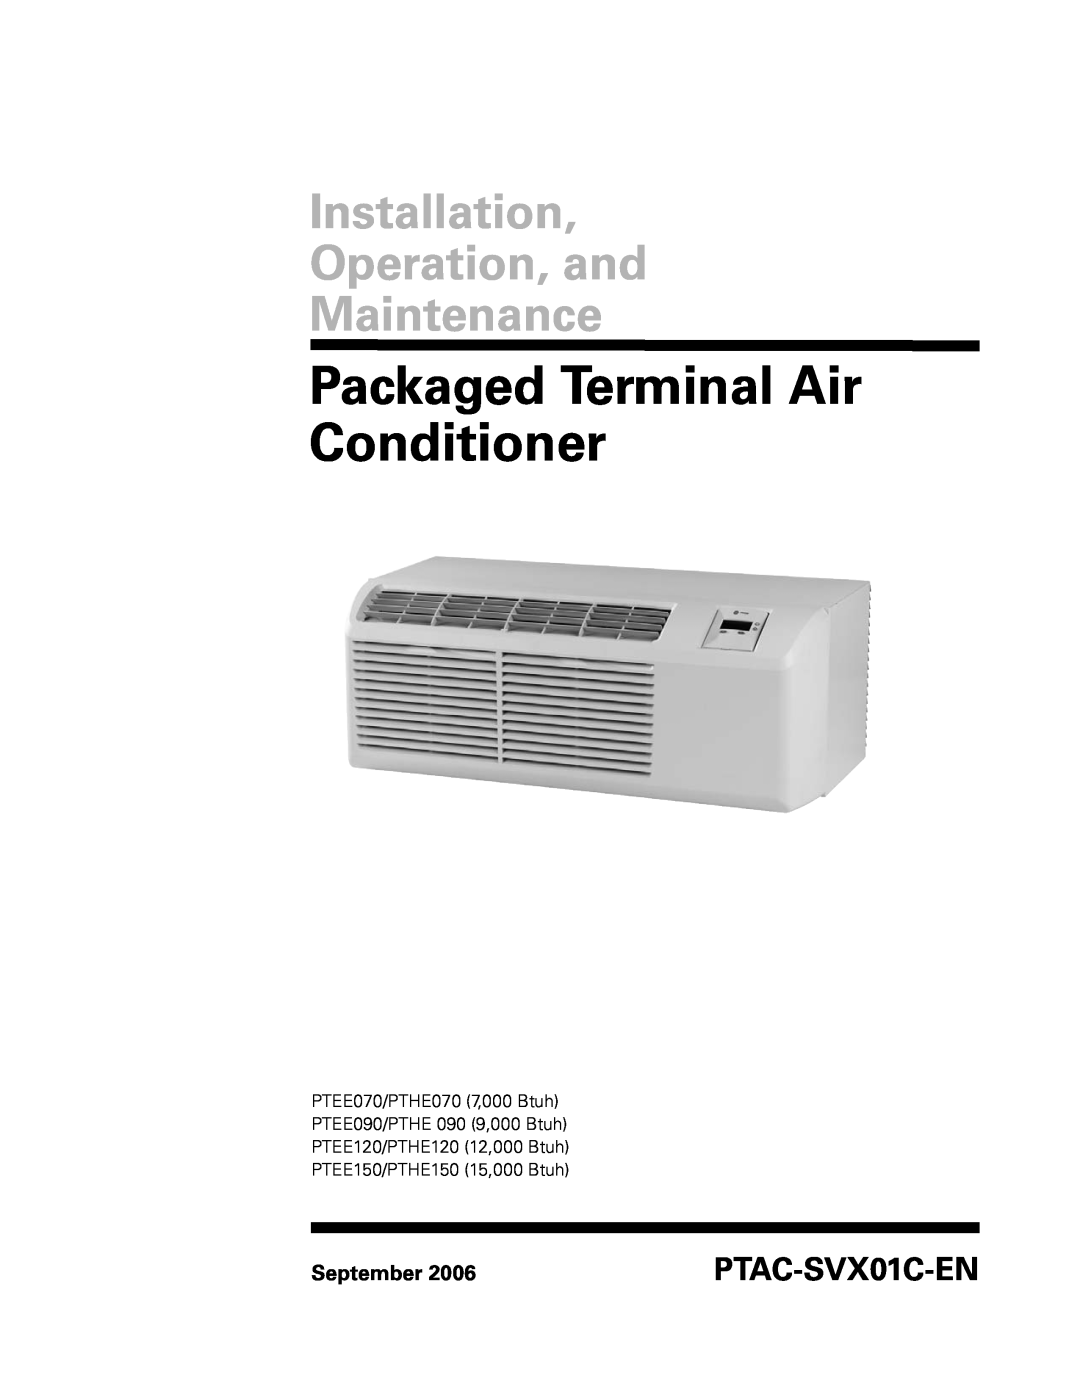 Trane PTAC-SVX01C-EN manual Packaged Terminal Air Conditioner, Installation Operation, and Maintenance, September 